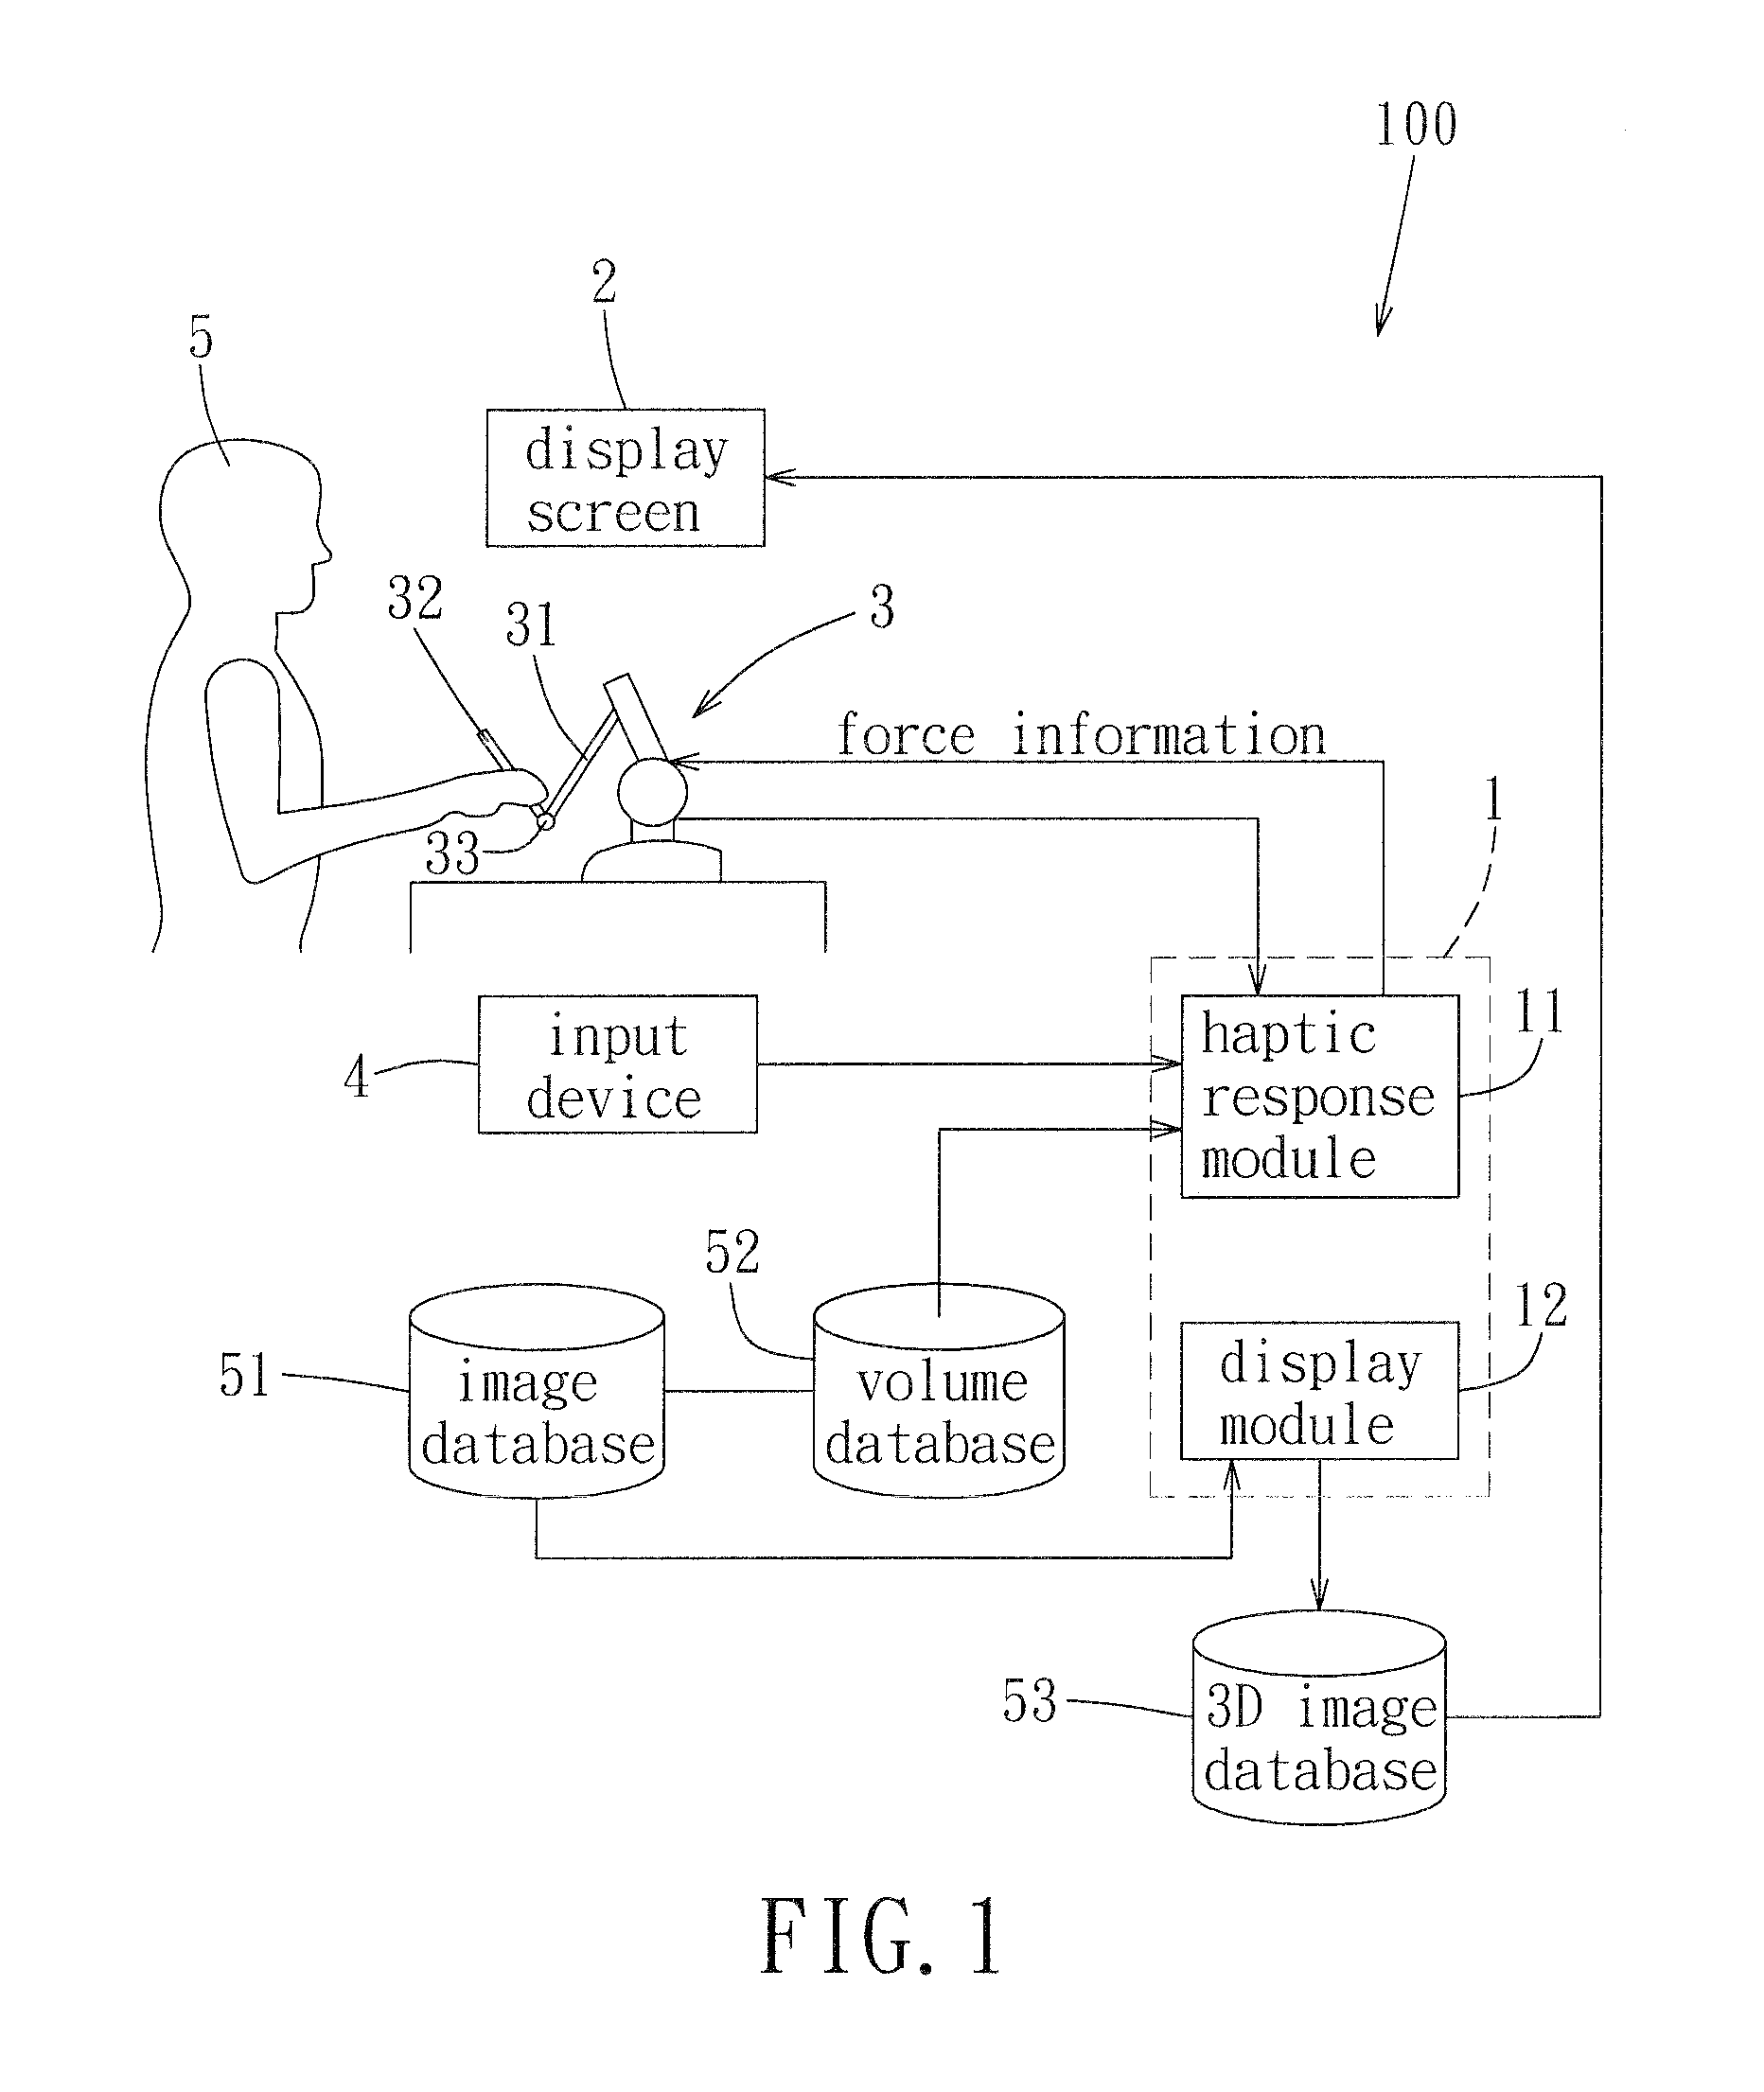 Method for Generating Real-Time Haptic Response Information for a Haptic Simulating Device